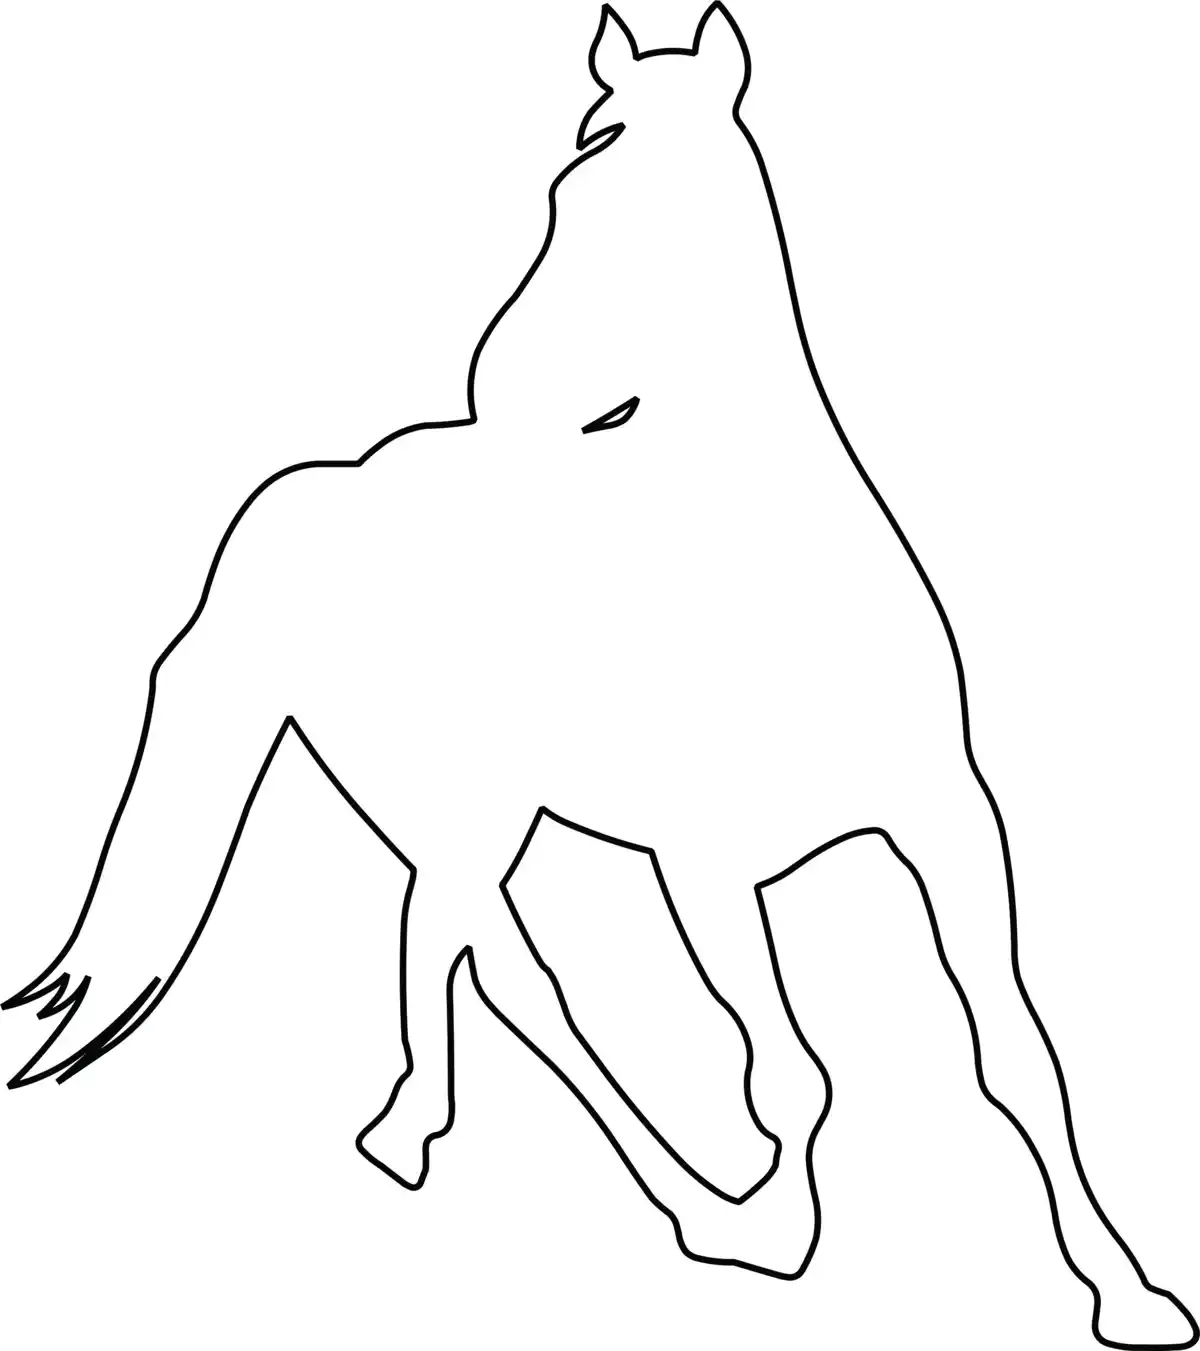 Free Download Coloring PDF, Free Horse Coloring And Activity Coloring Pages Pdf